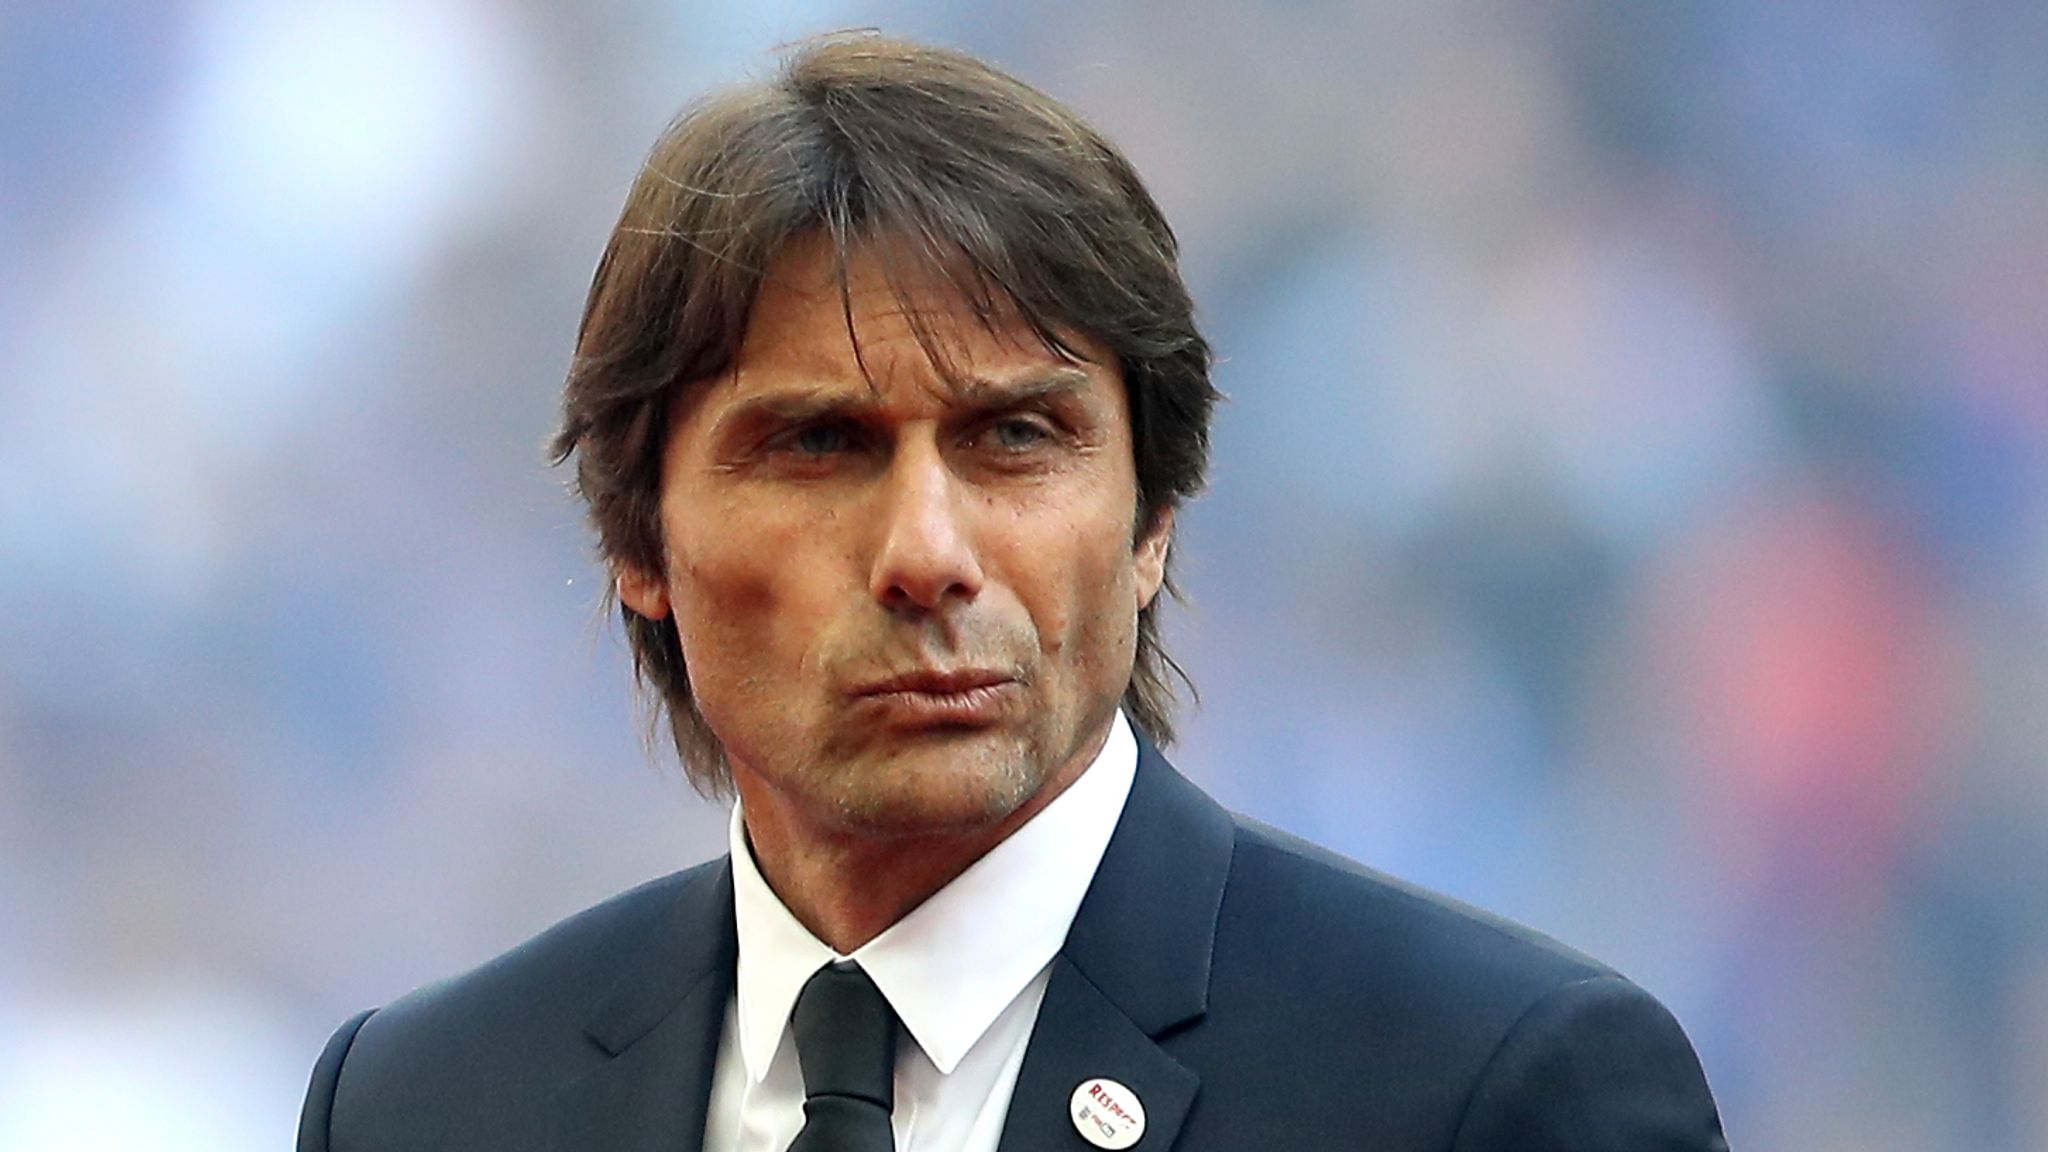 Antonio Conte: Tottenham's manager search dealt blow as Italian unconvinced  by Spurs project, Football News